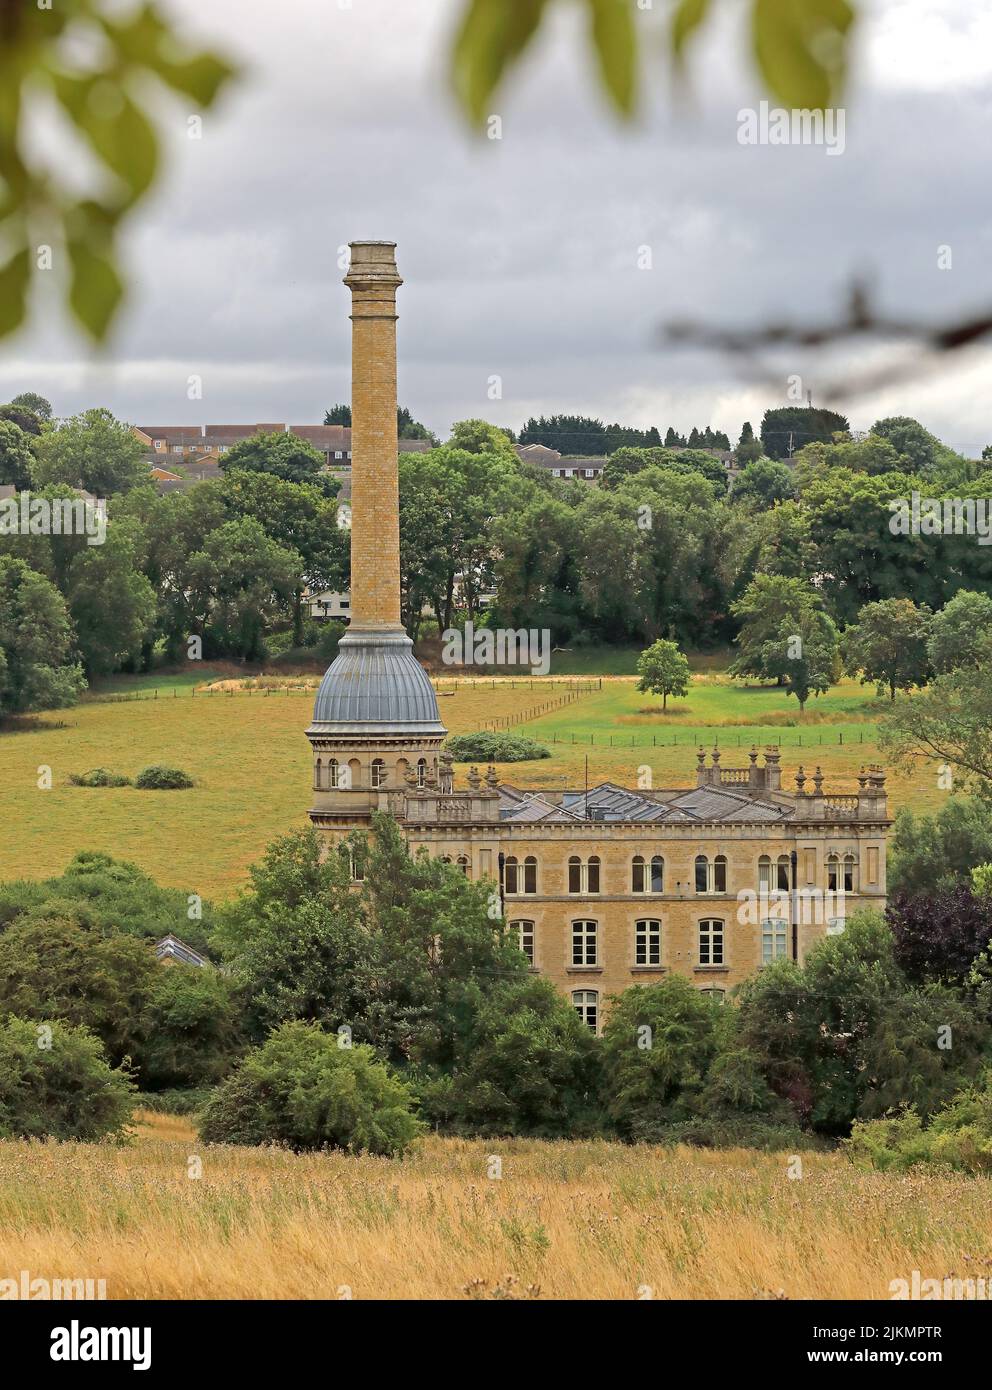 Bliss Historic Tweed Mill, Chipping Norton, Cotswolds, Gloucestershire, Angleterre, ROYAUME-UNI Banque D'Images